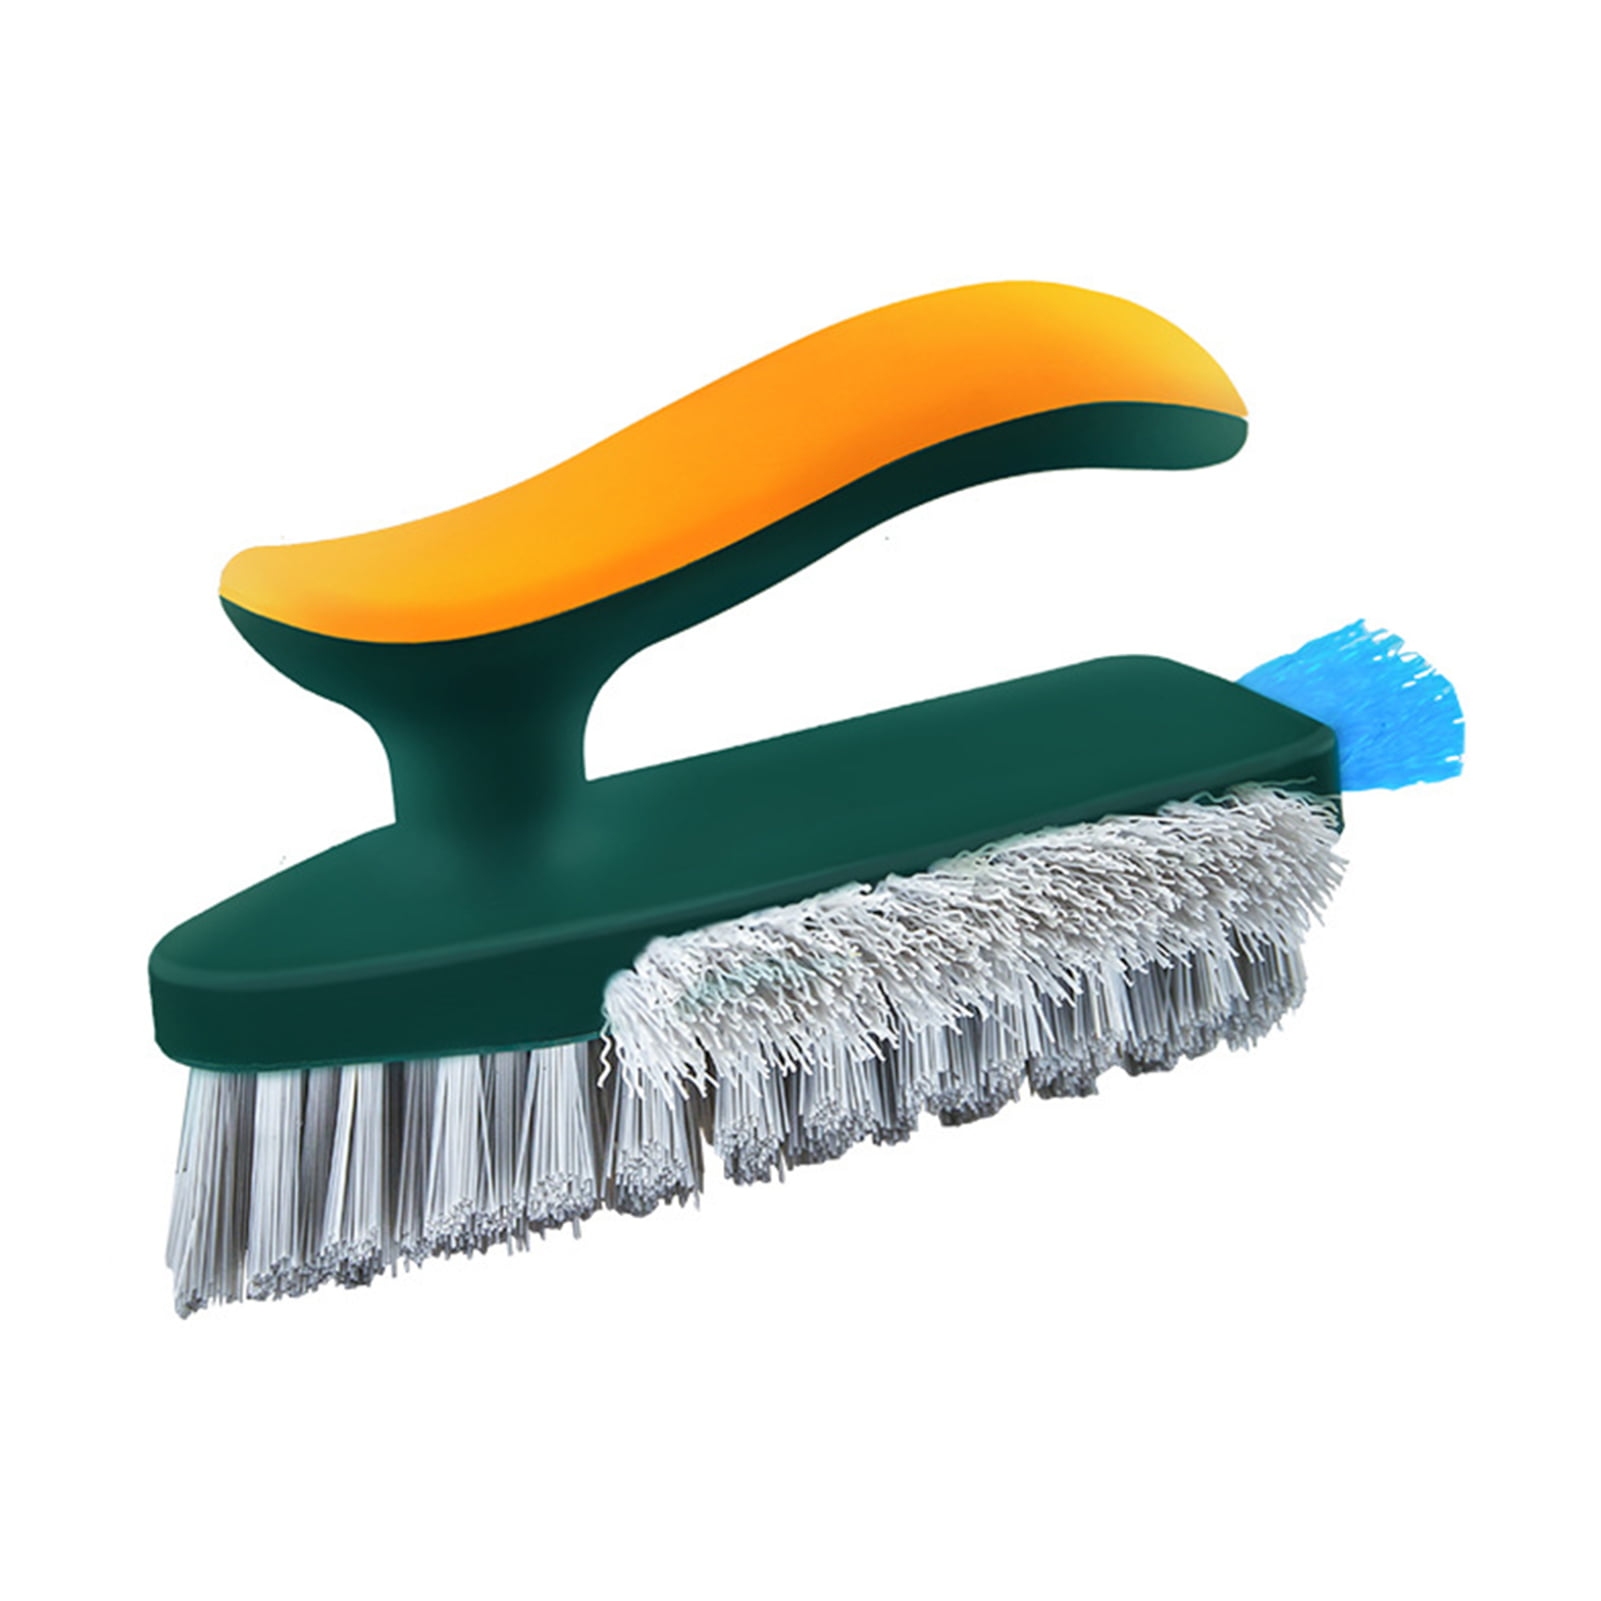 Hesroicy Cleaning Brush Convenient Multifunctional Wide